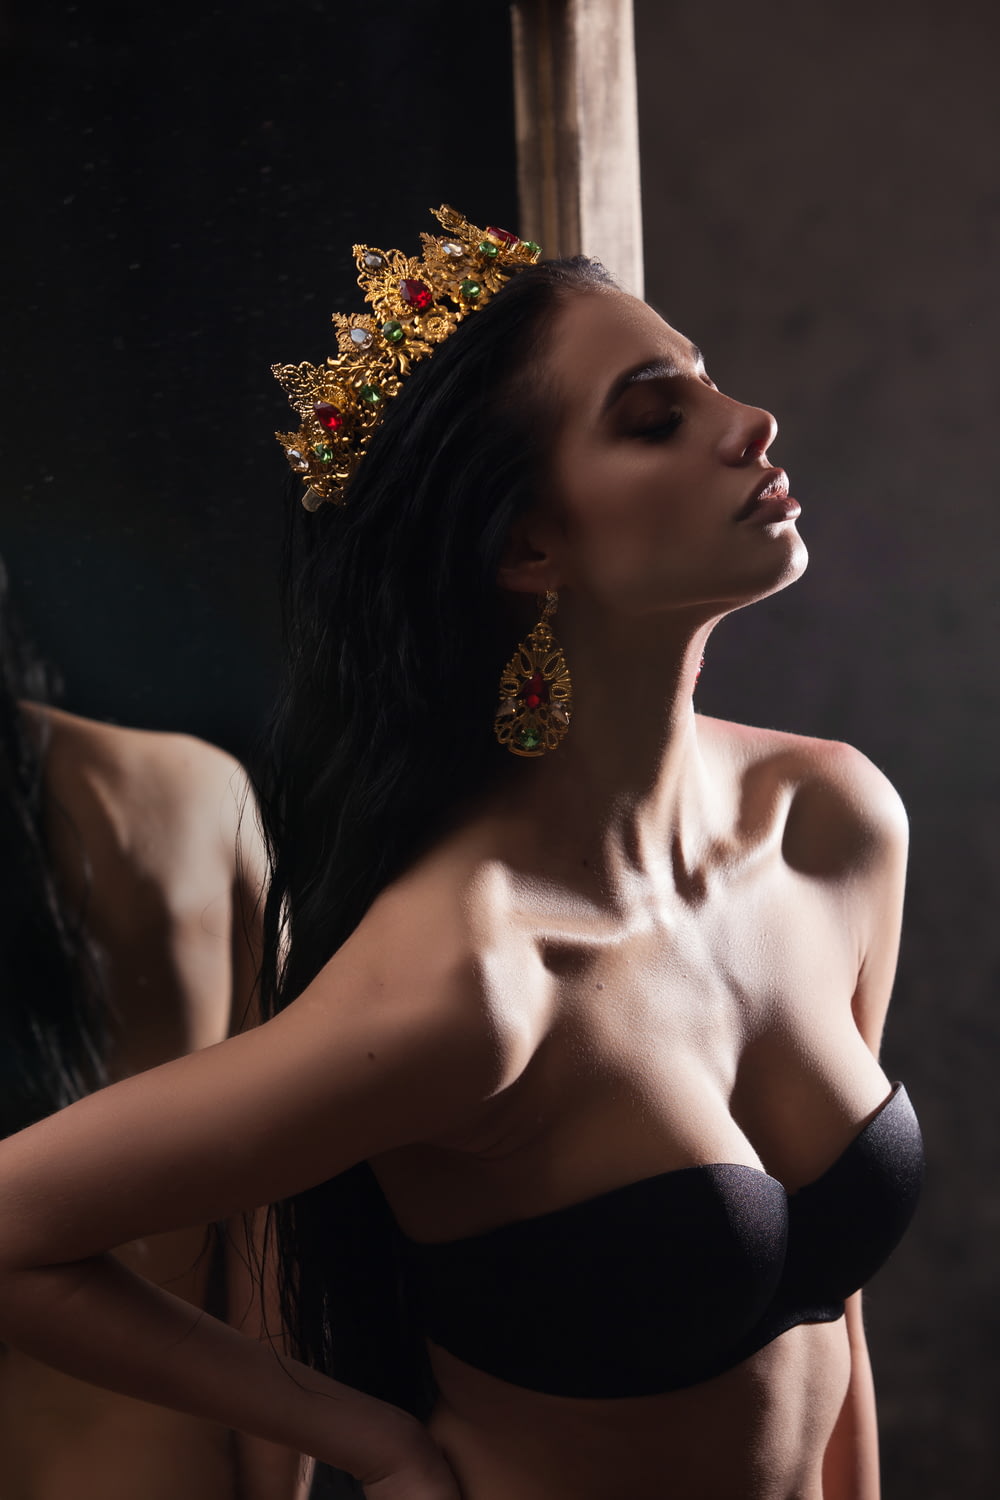 woman in black brassiere and gold-colored crown